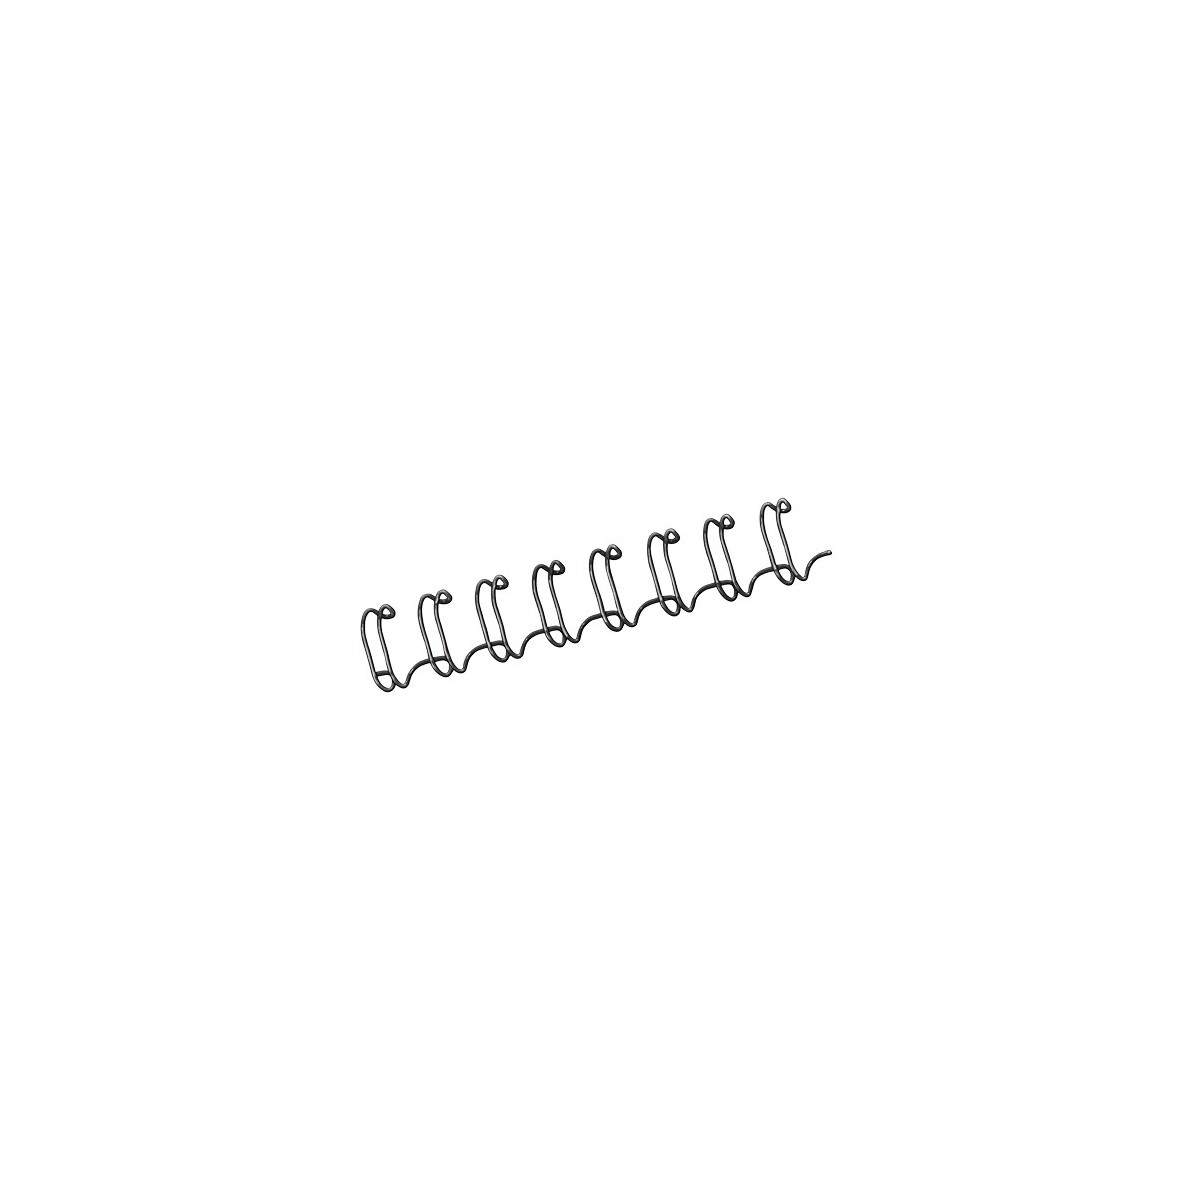 PACK 100 WIRES 8 MM NEGRO FELLOWES 53261